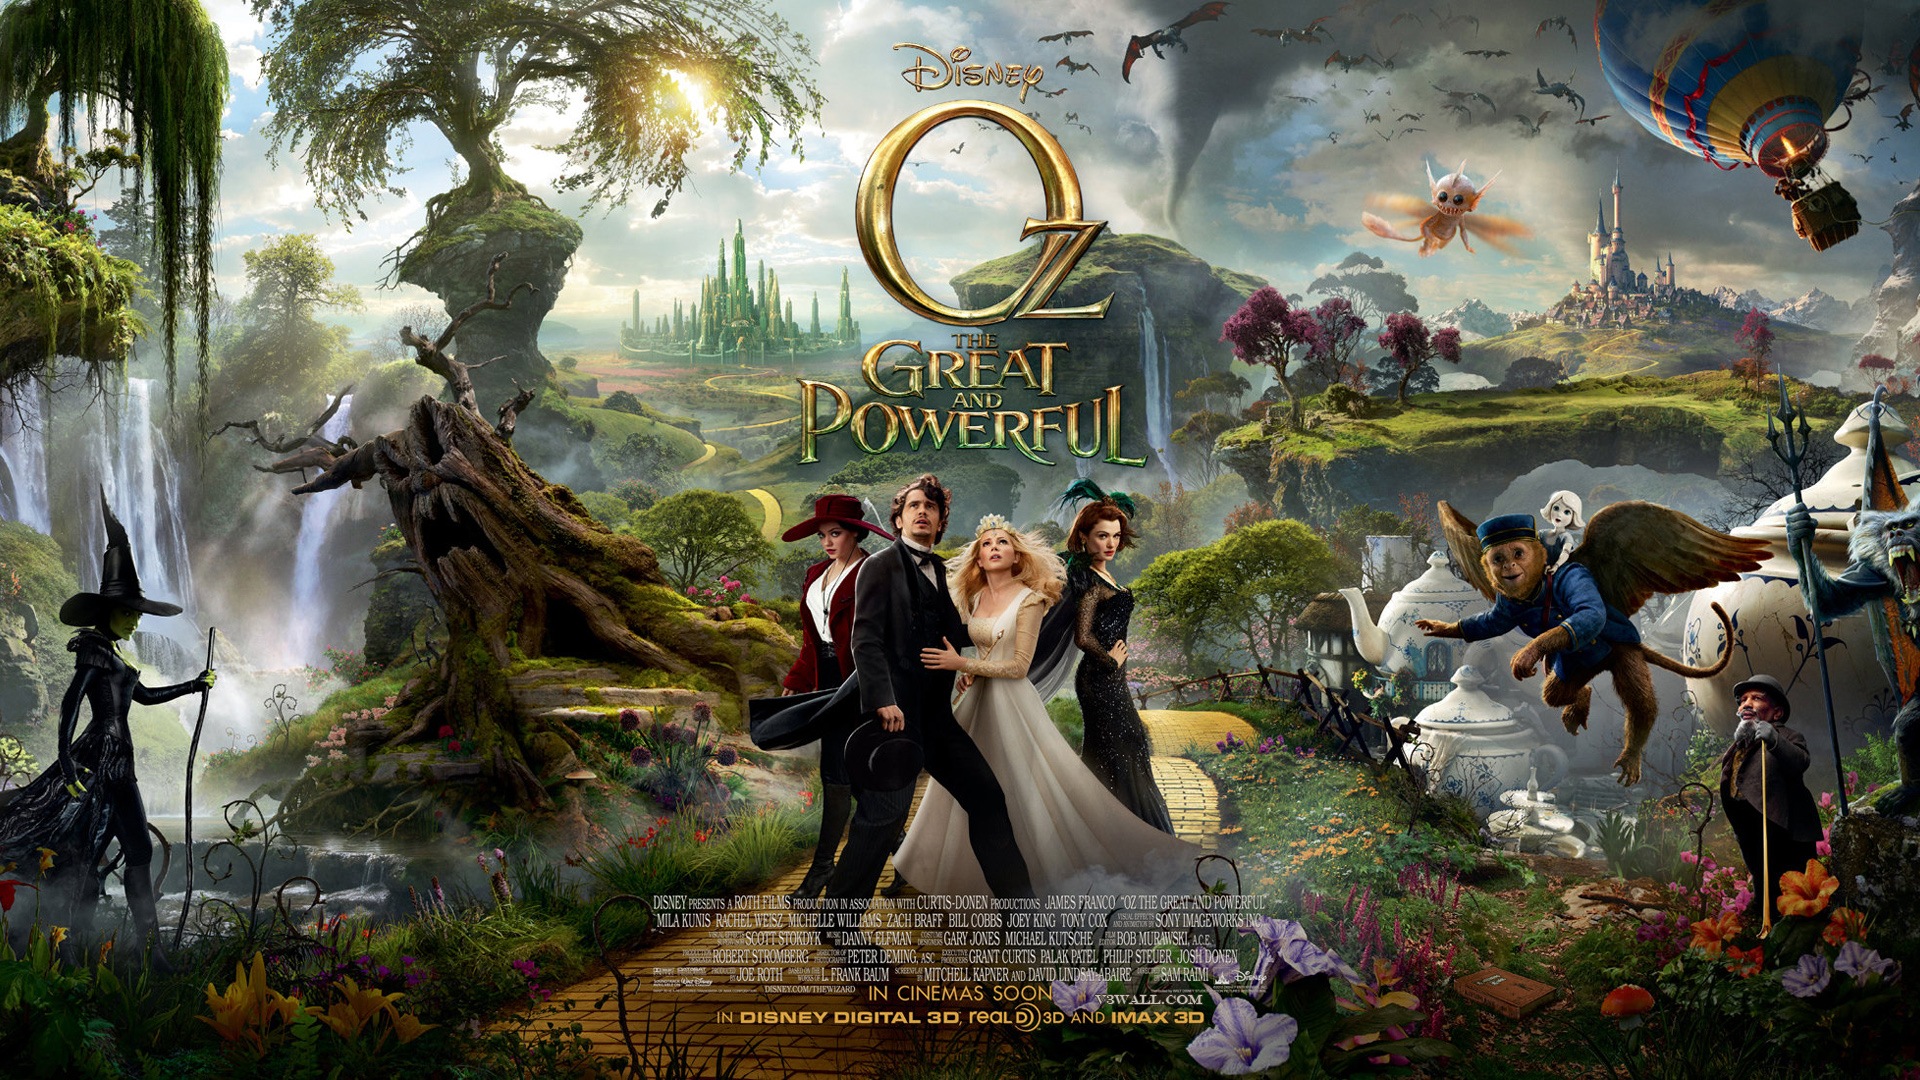 Oz The Great and Powerful 2013 HD wallpapers #20 - 1920x1080